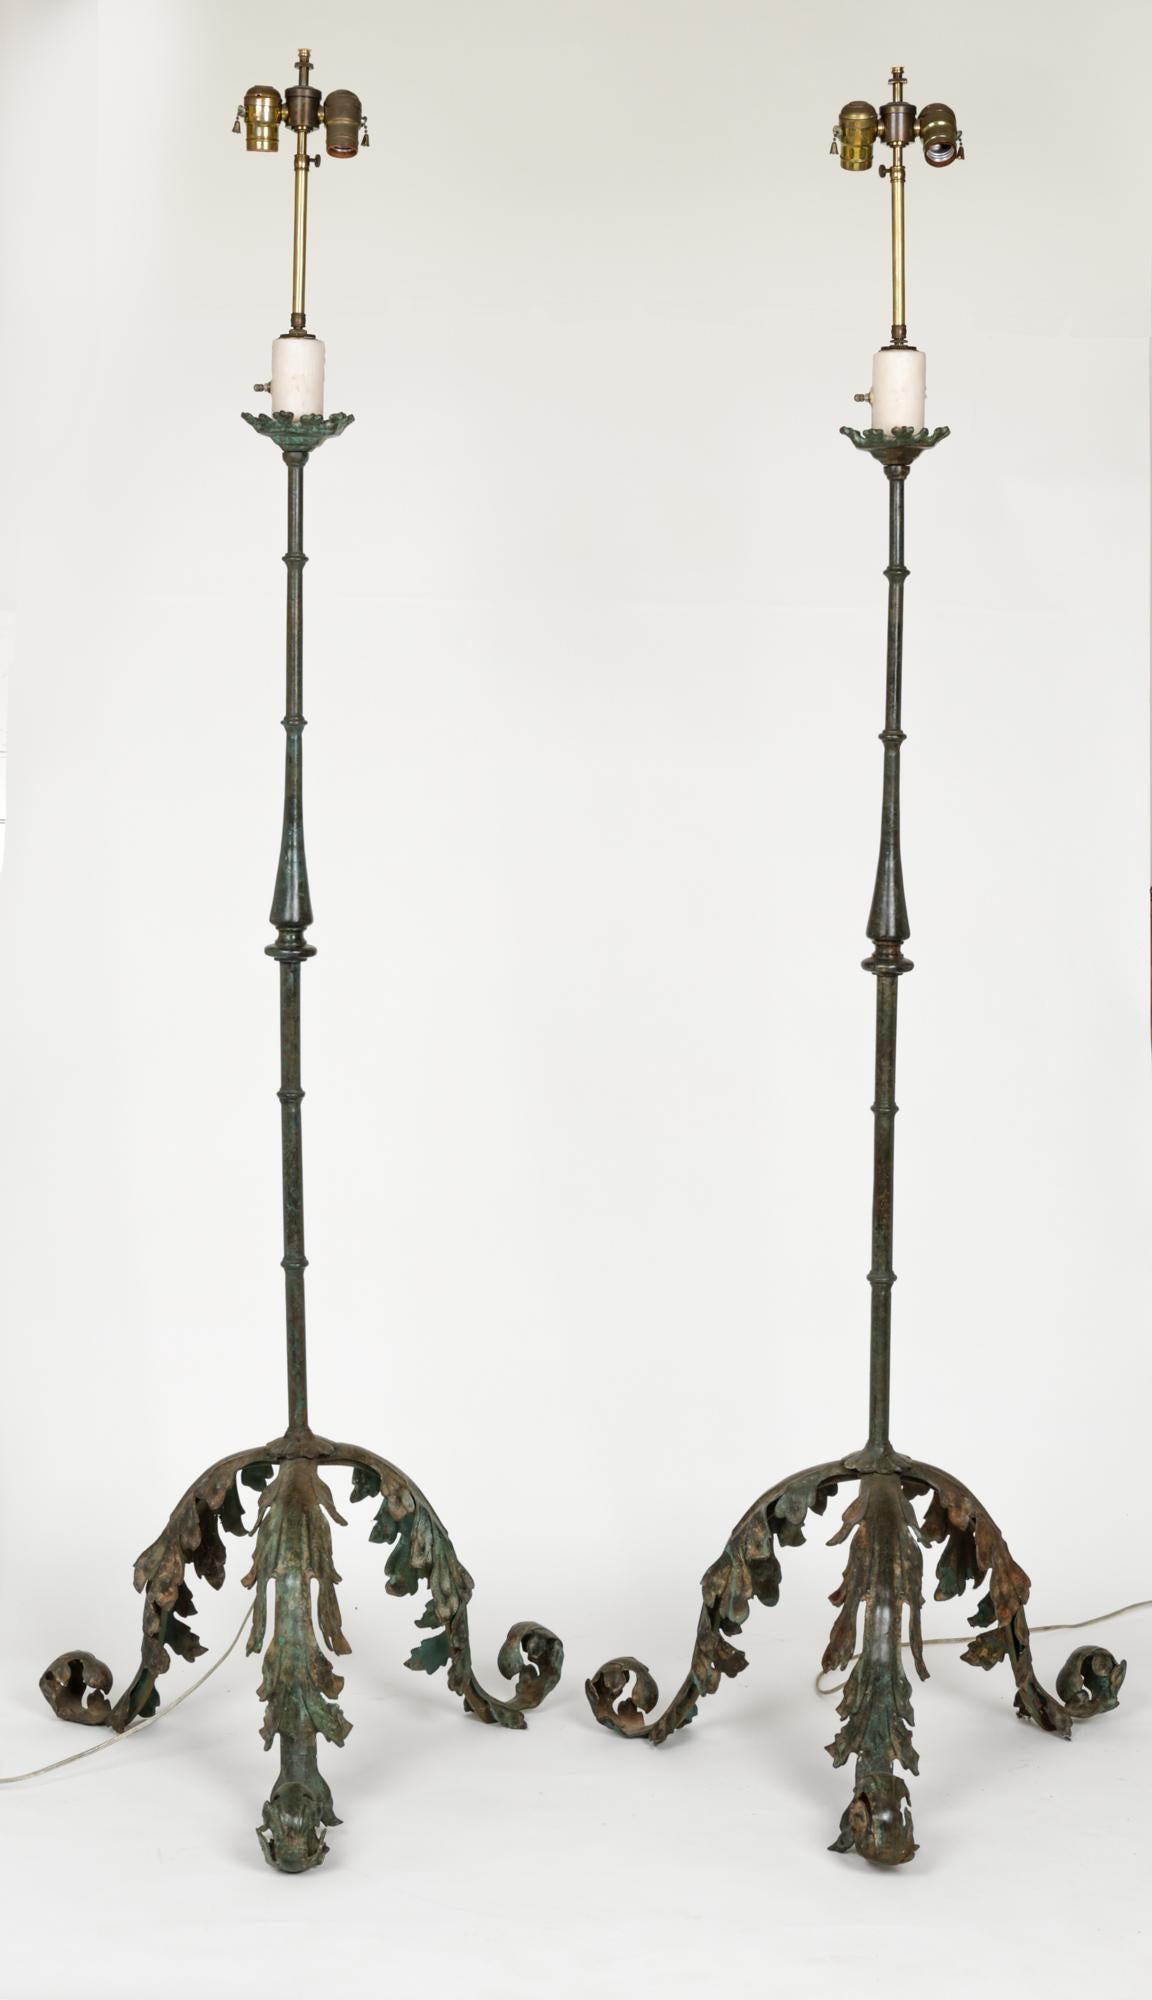 Dramatic pair of floor lamps. Base support is tripod acanthus leaf motif in heavy cast bronze. Contrasted to the simple, elegant posts also in bronze. Beautifully verdigris finish. Shades not included.